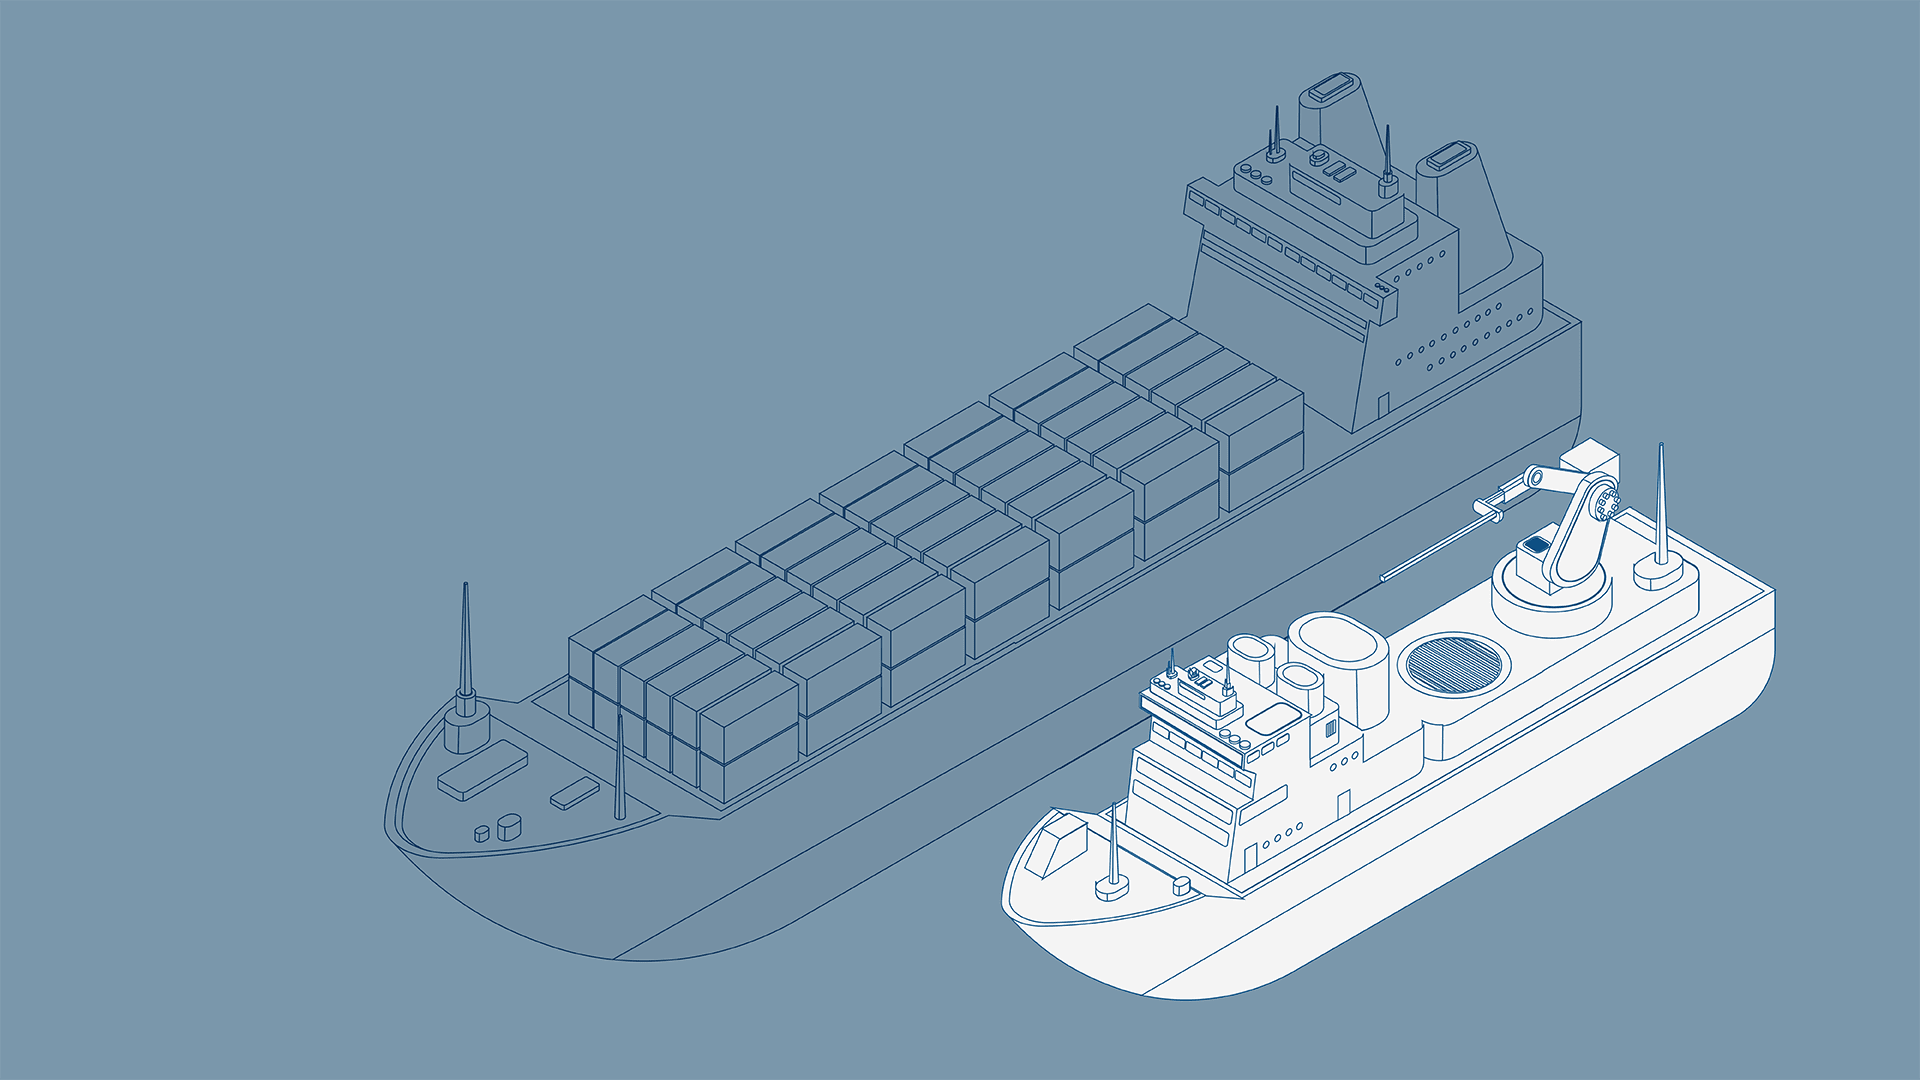 A Seascope Maritime Insurance Container Ship Illustration